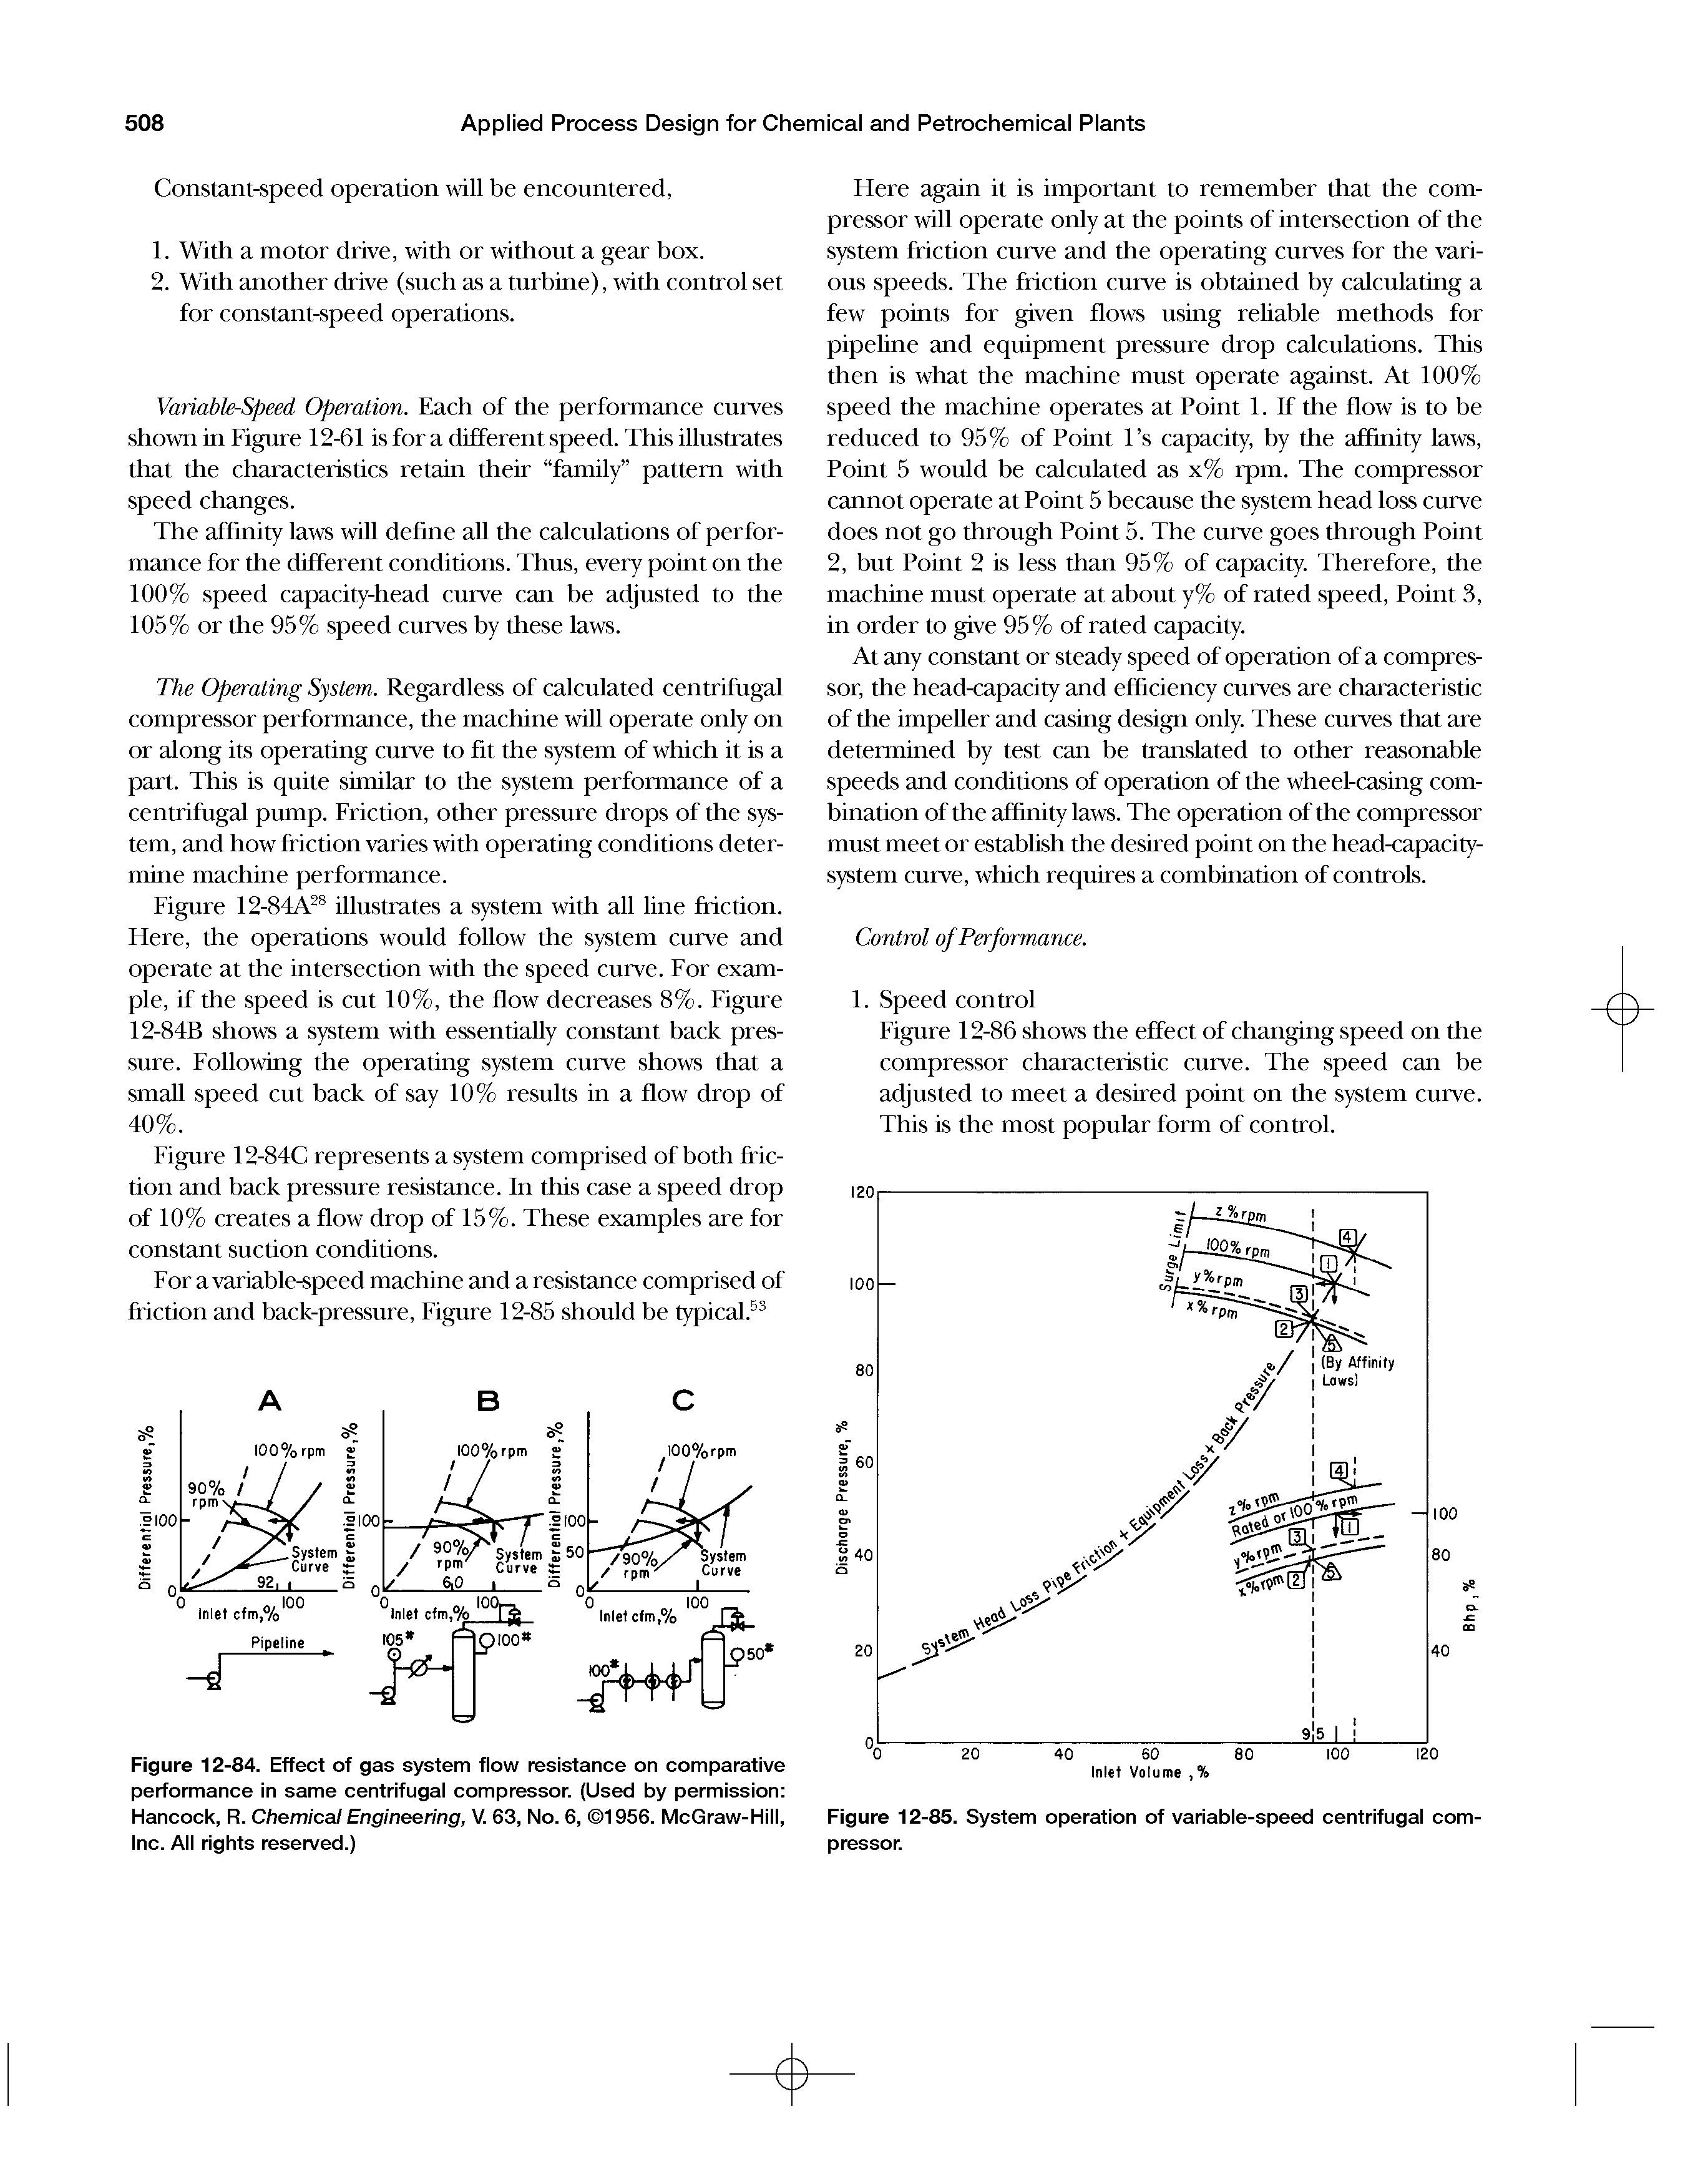 Figure 12-84. Effect of gas system flow resistance on comparative performance in same centrifugal compressor. (Used by permission Hancock, R. Chemical Engineering, V. 63, No. 6, 1956. McGraw-Hill, Inc. All rights reserved.)...